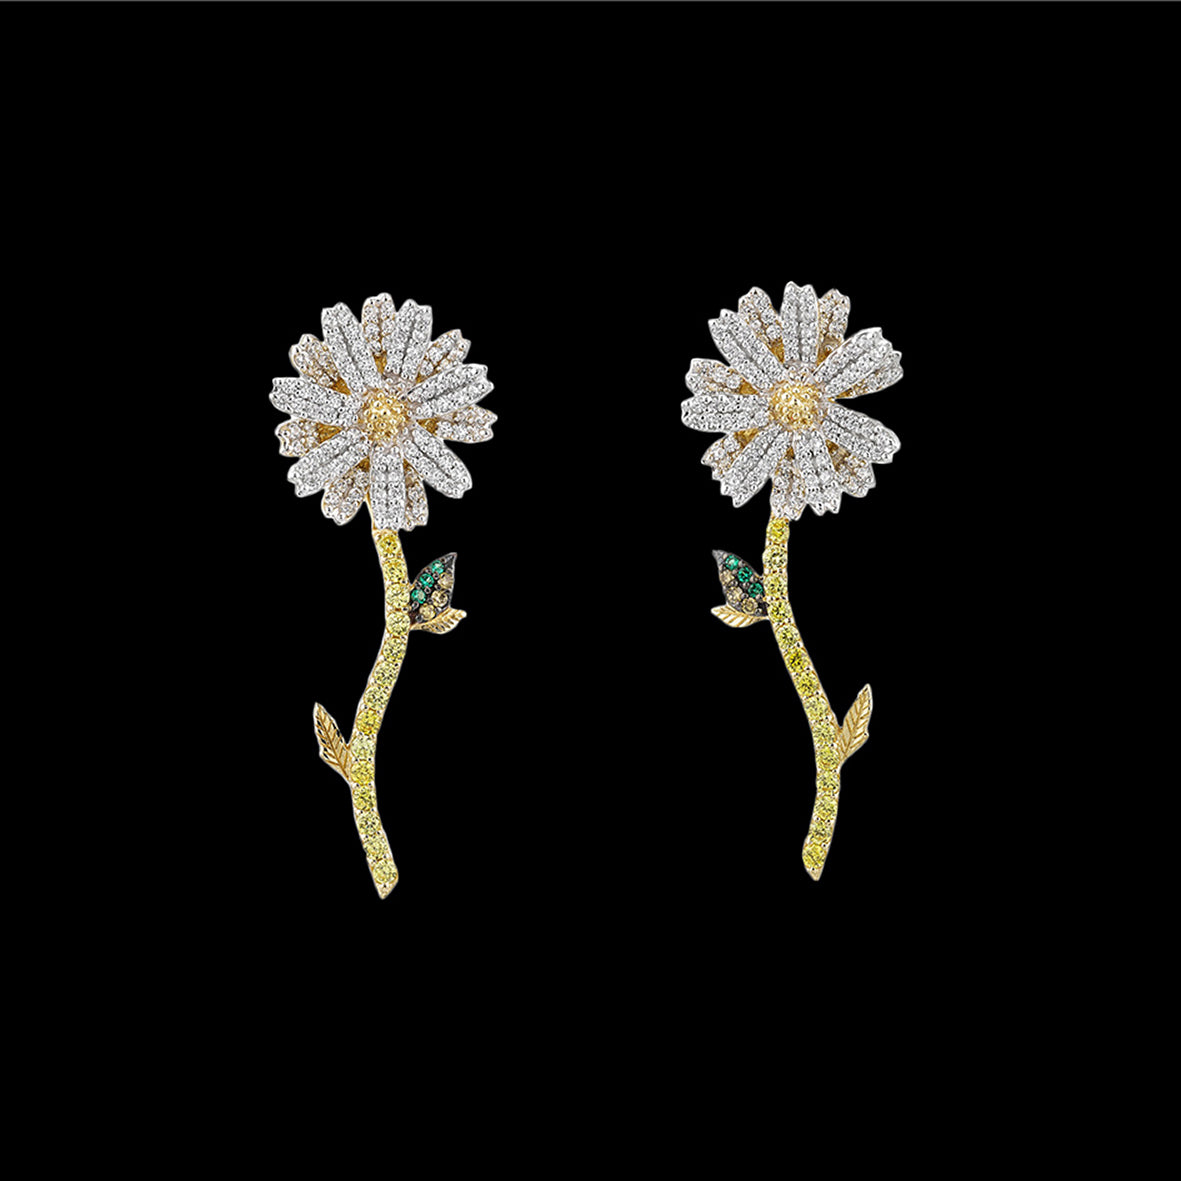 Daisy Diamond Earrings, Earring, Anabela Chan Joaillerie - Fine jewelry with laboratory grown and created gemstones hand-crafted in the United Kingdom. Anabela Chan Joaillerie is the first fine jewellery brand in the world to champion laboratory-grown and created gemstones with high jewellery design, artisanal craftsmanship and a focus on ethical and sustainable innovations.